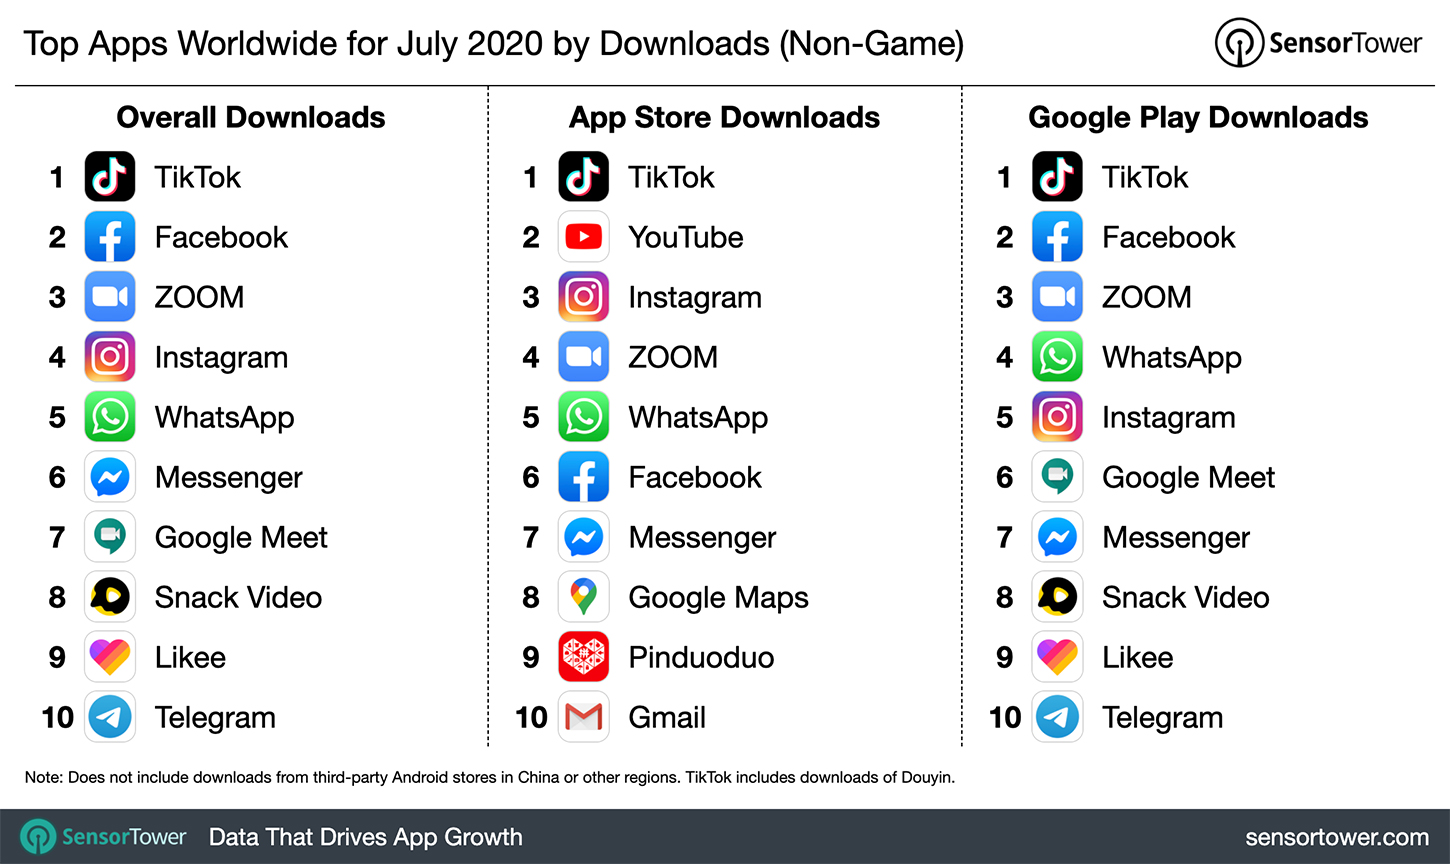 tiktok was the most download non gaming